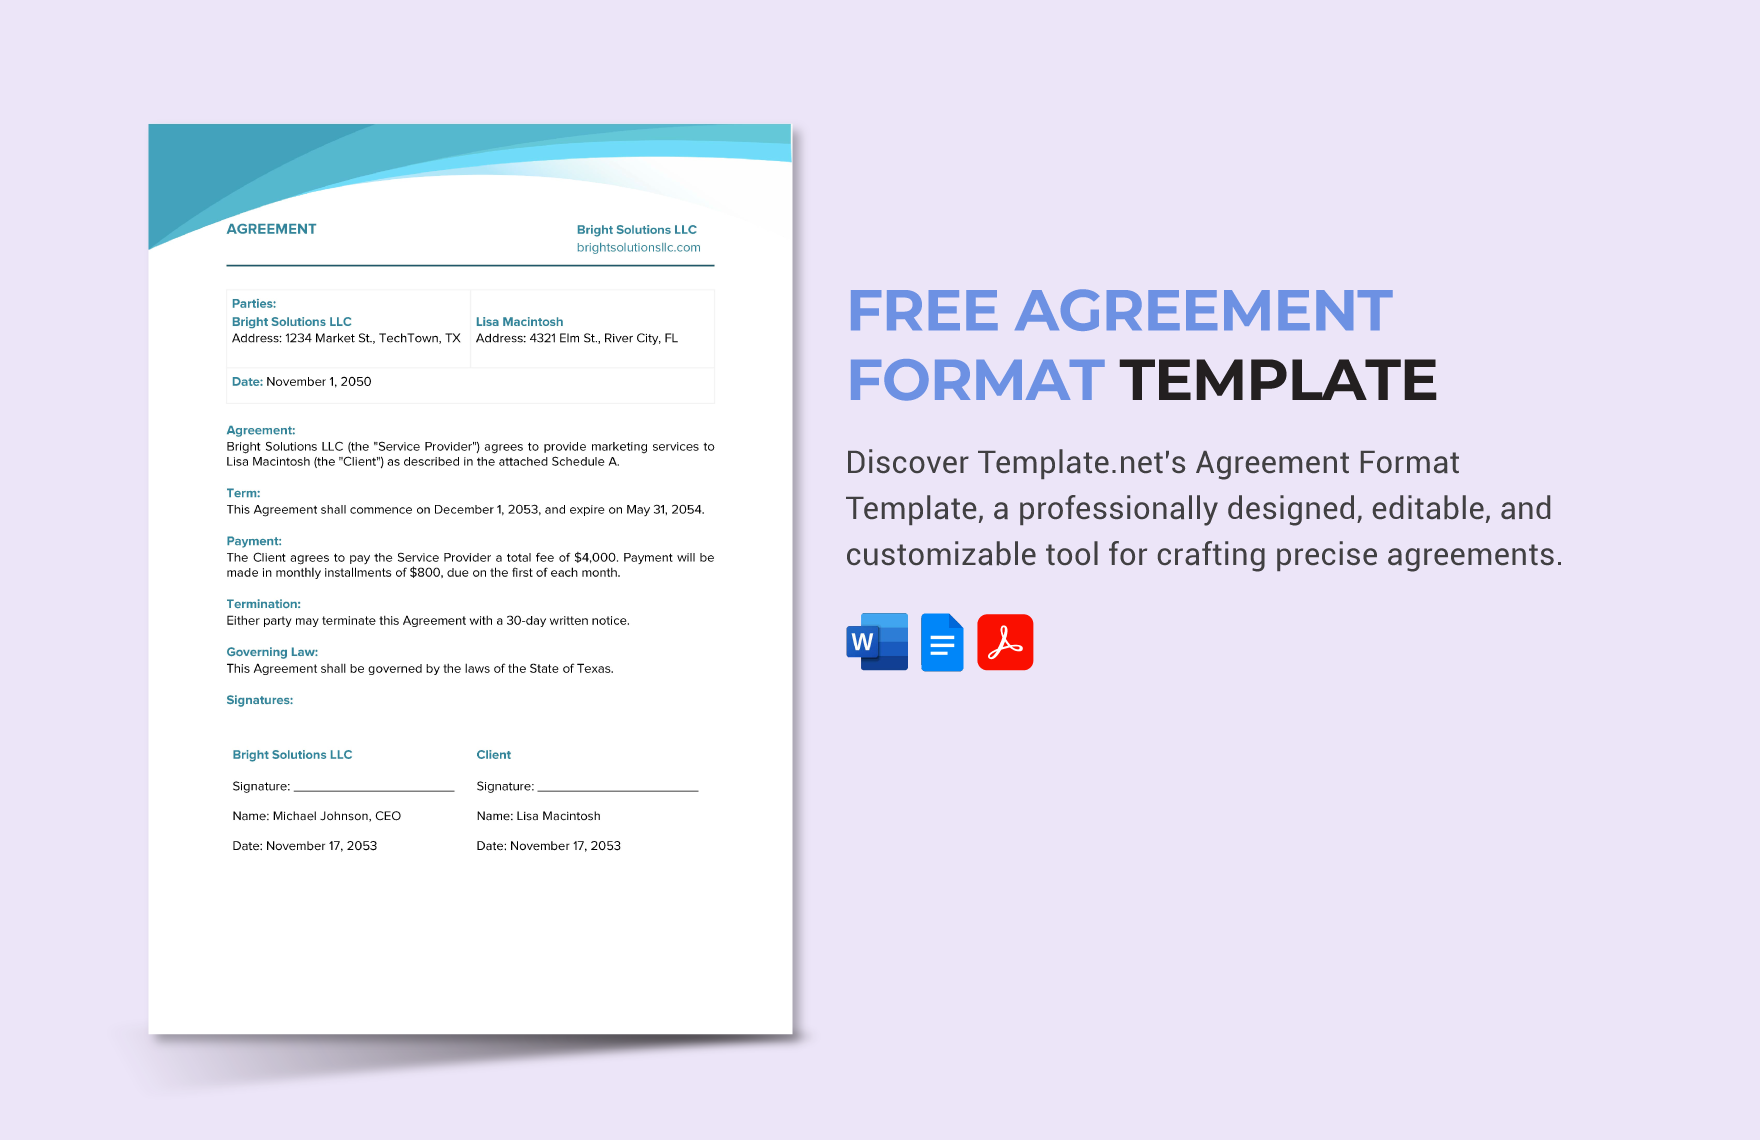 Free Agreement Format Template